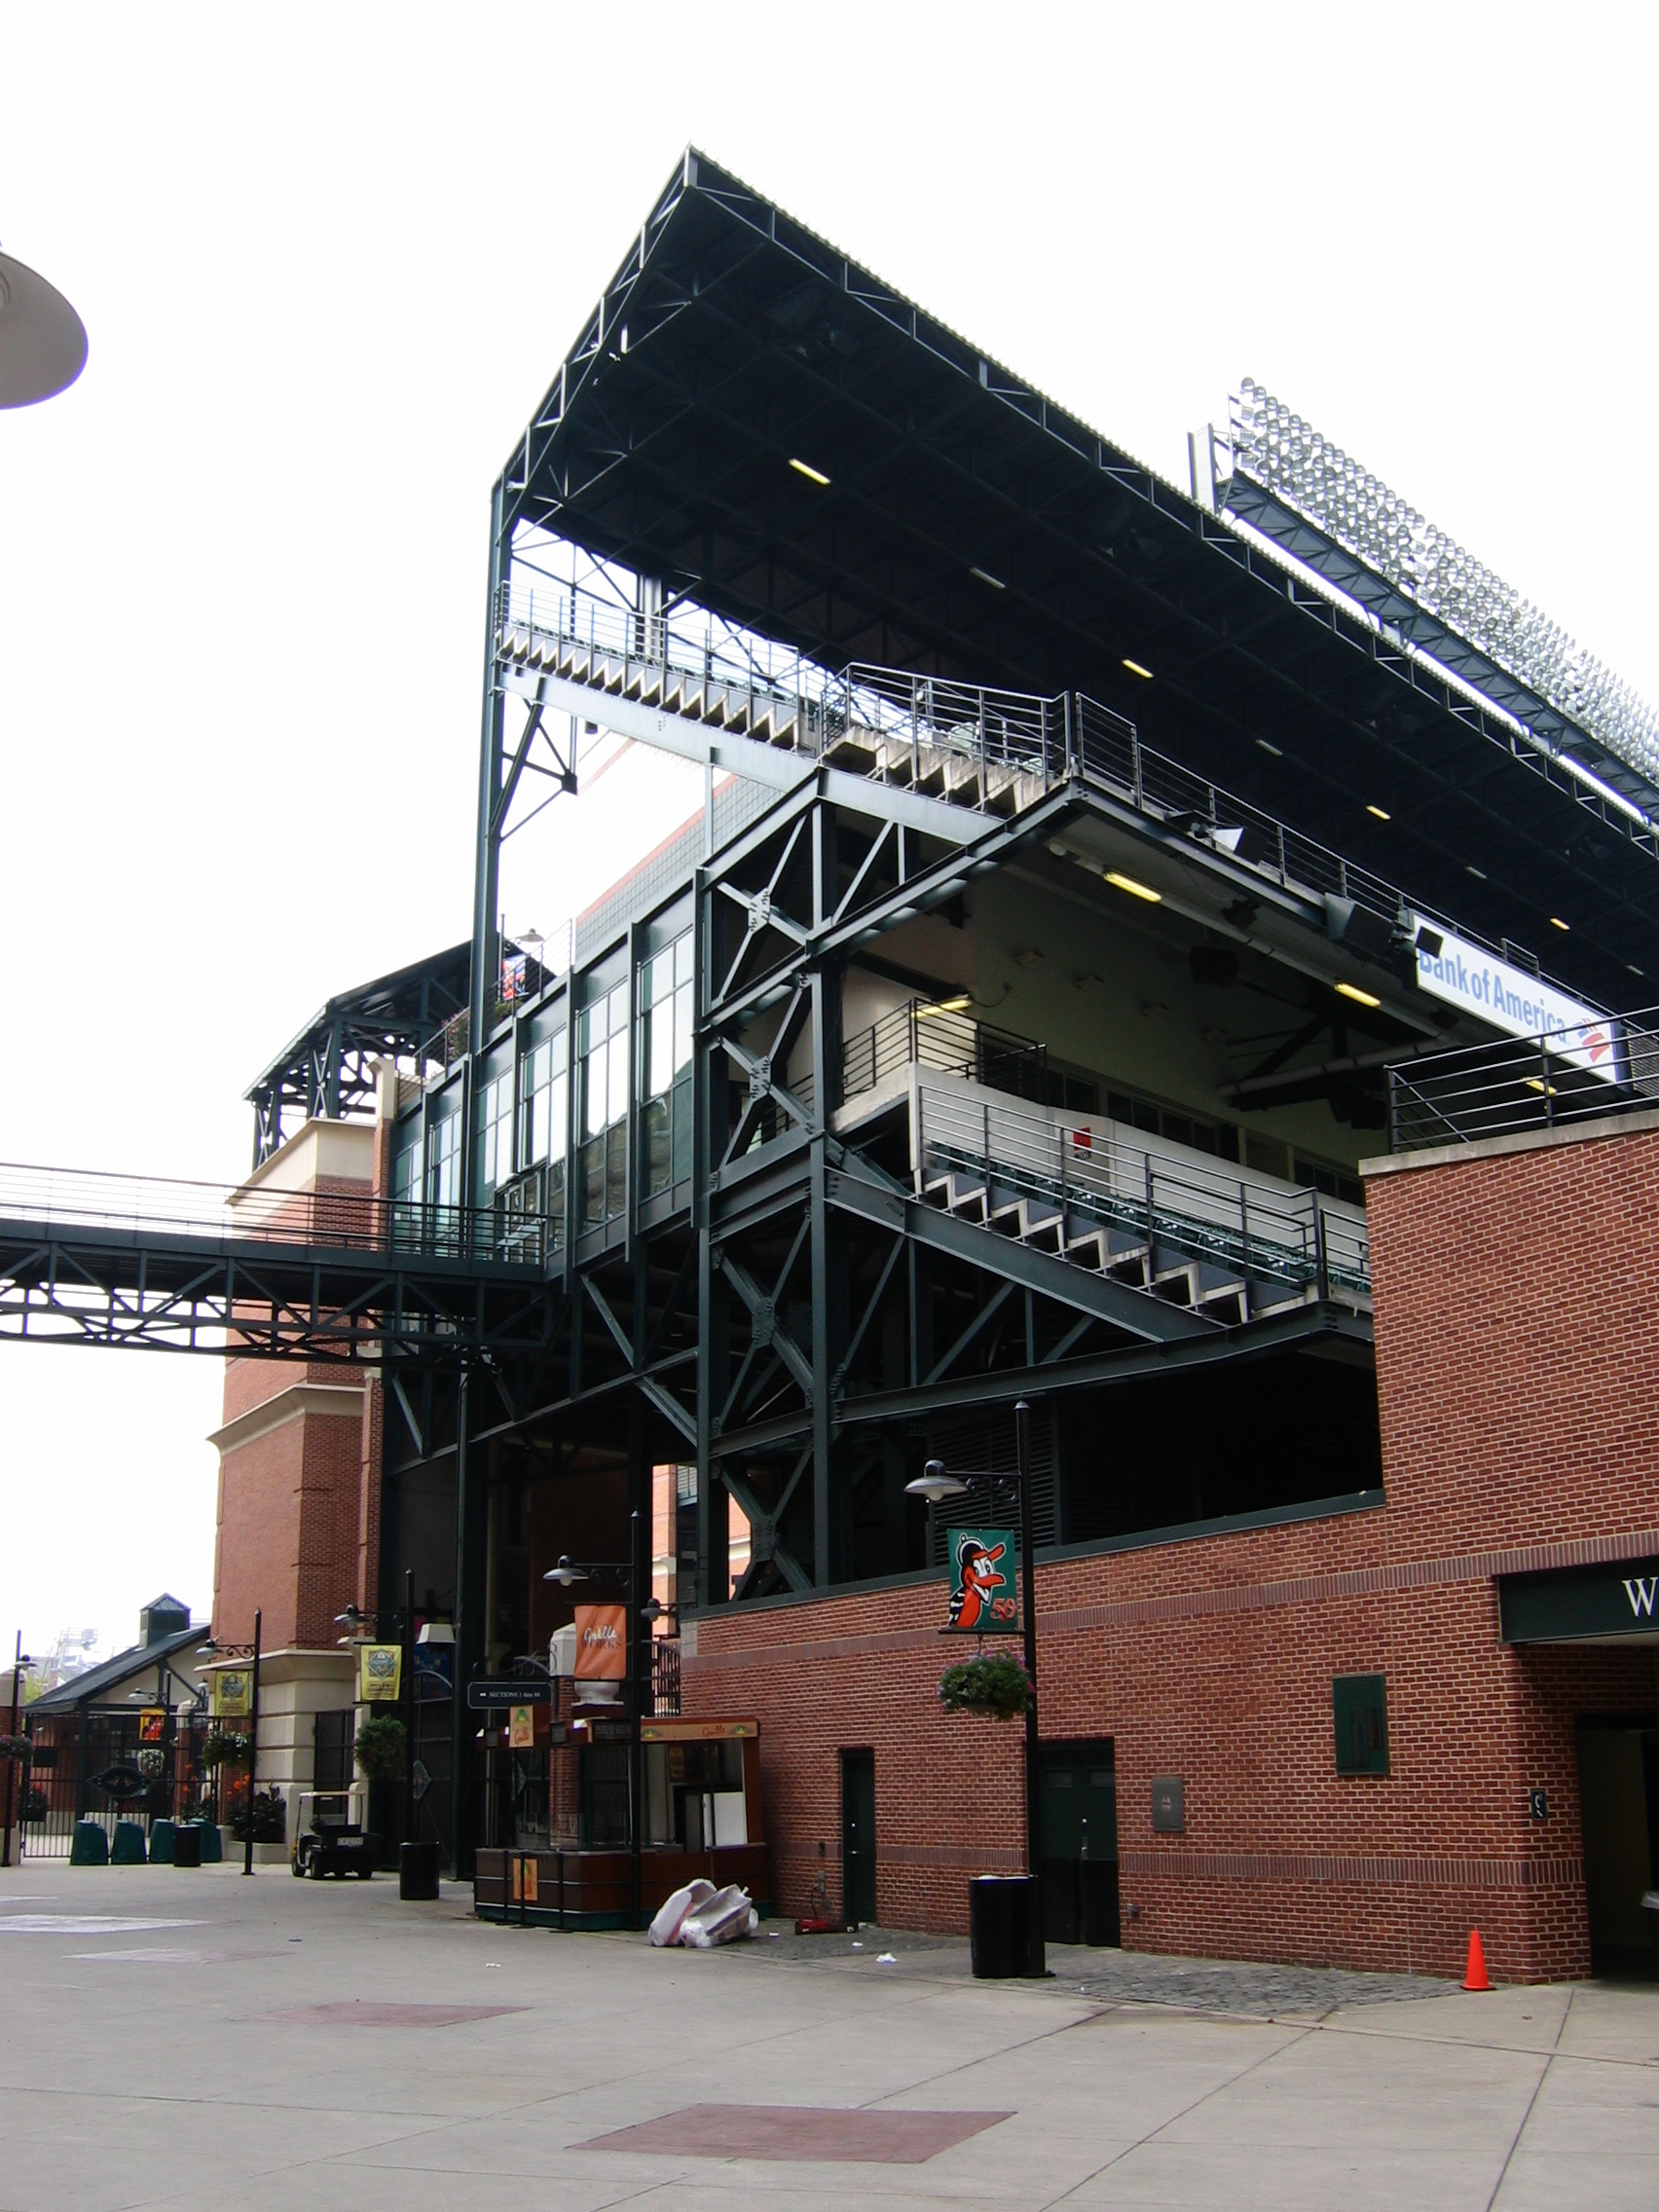 Engineer's Guide to Baltimore: Camden Yards and B&O Railroad Warehouse